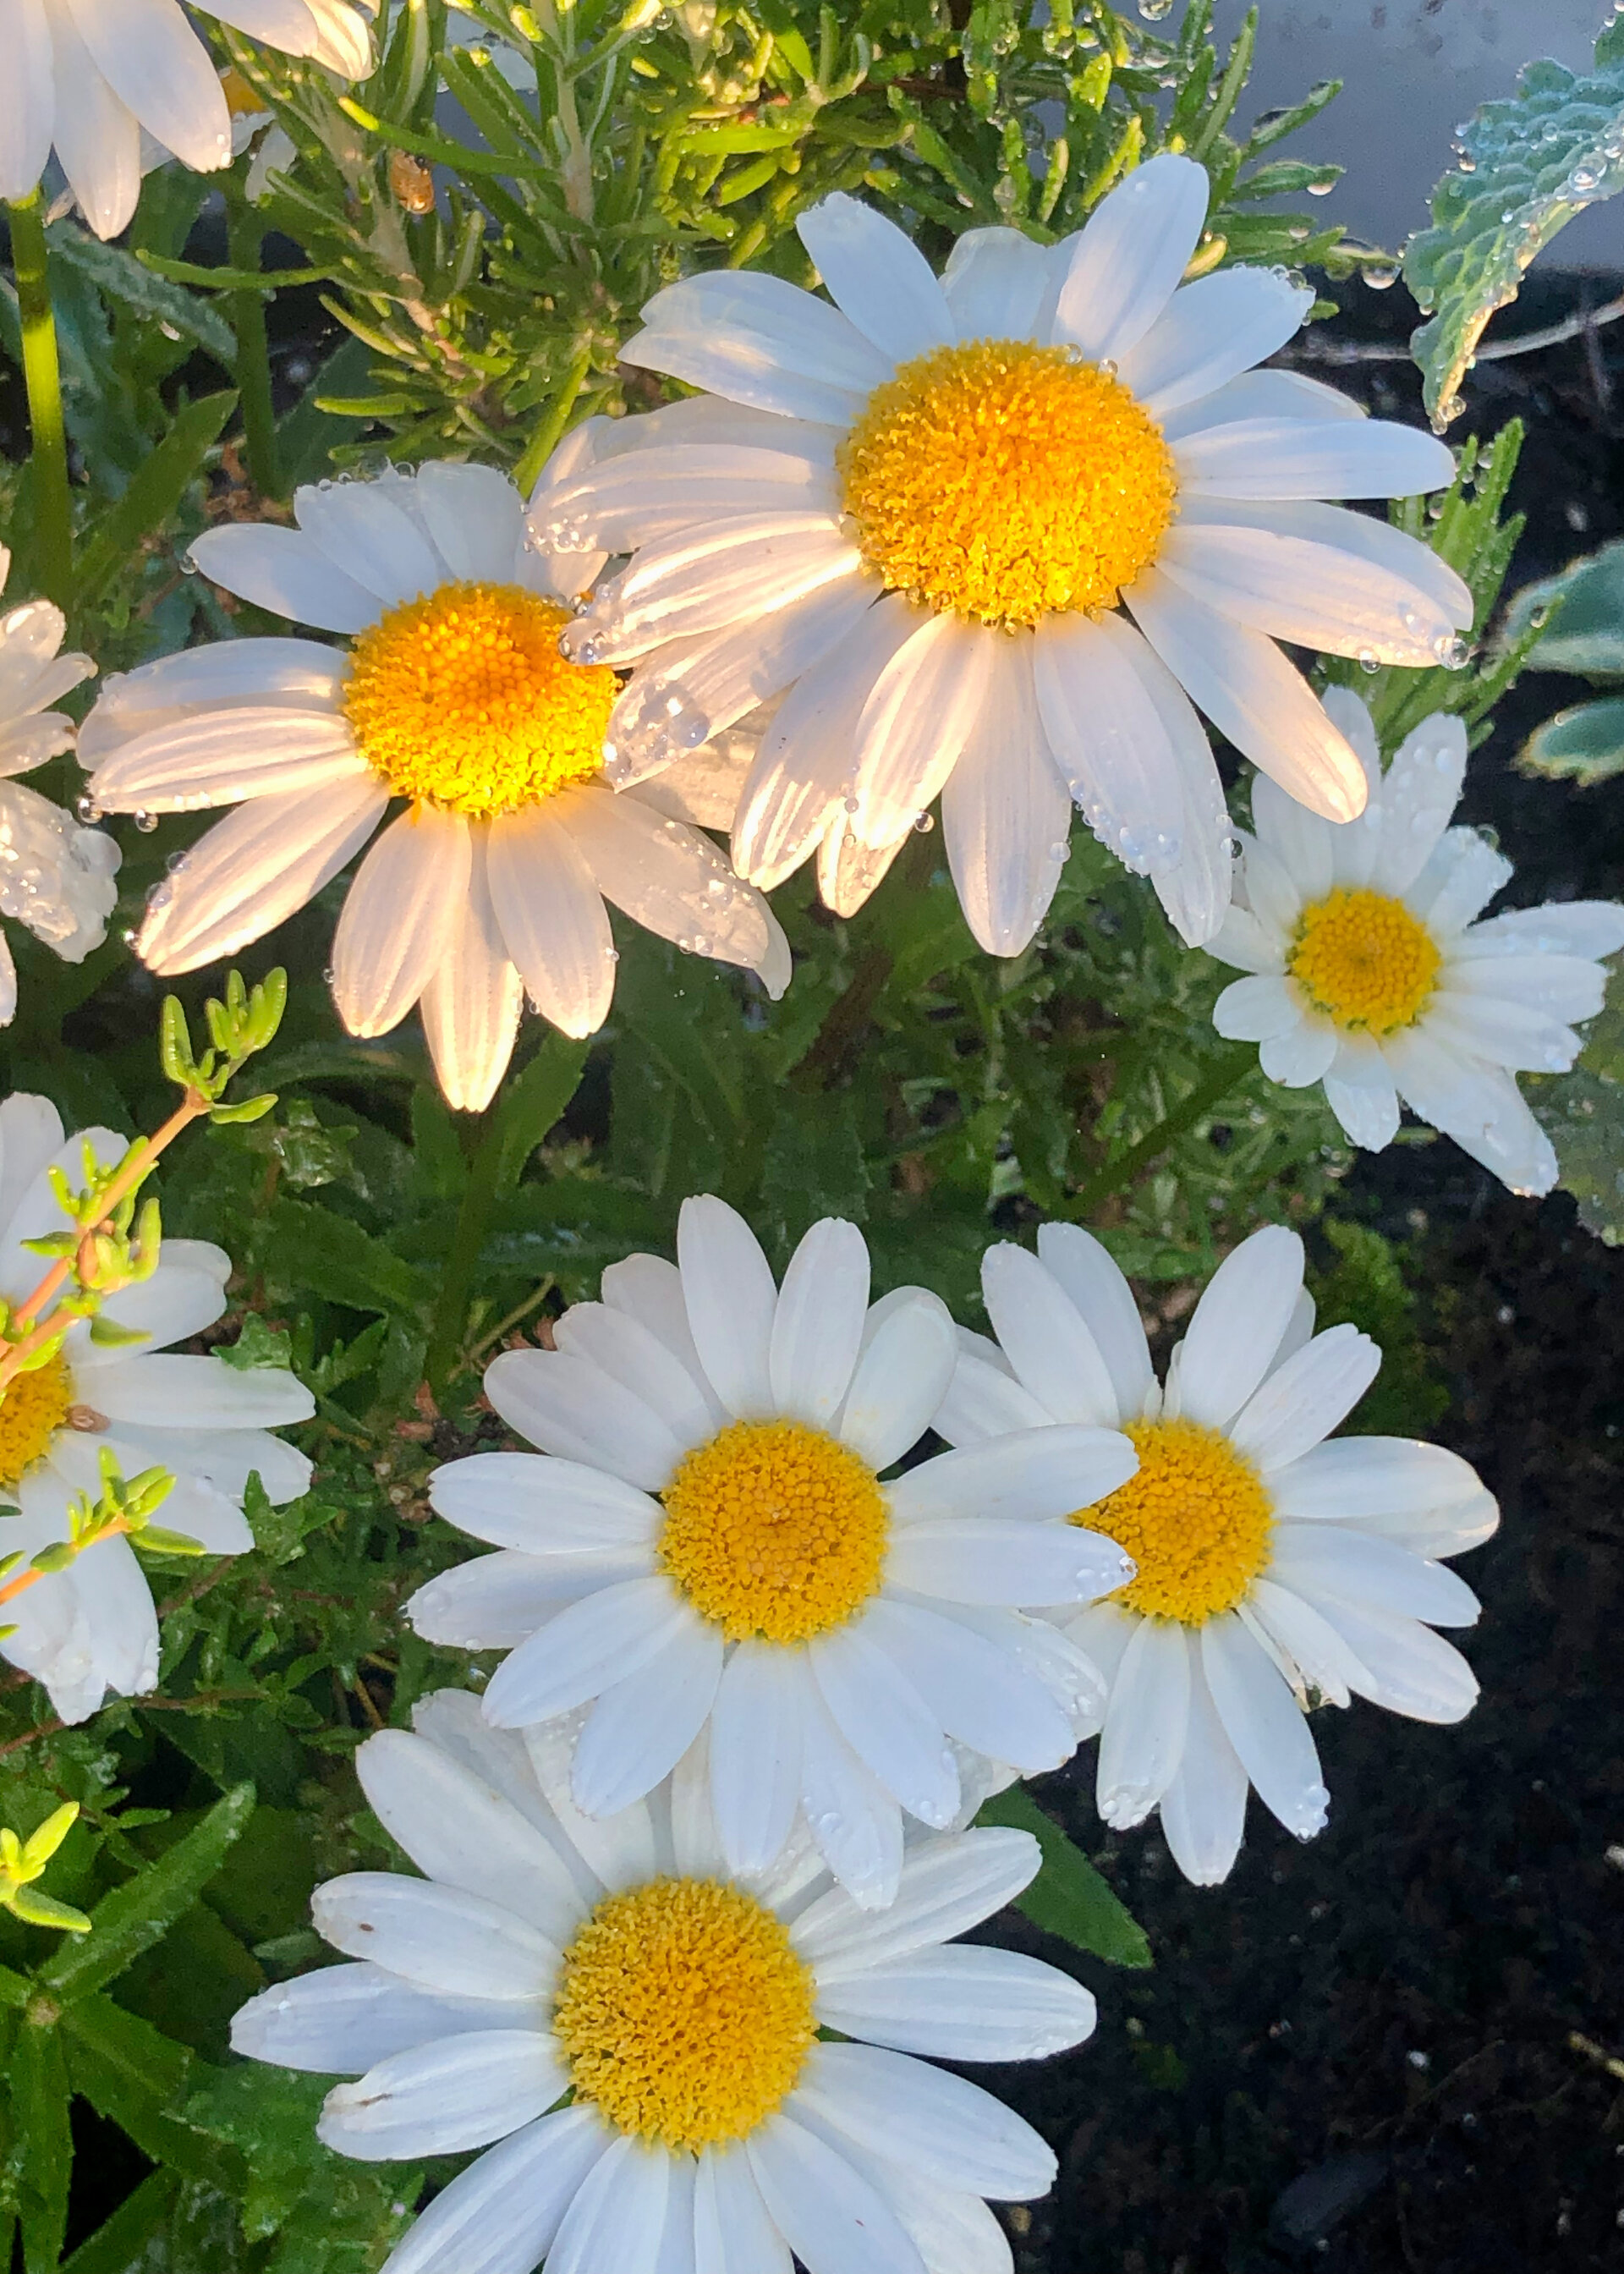  The daisies also did well this summer. 